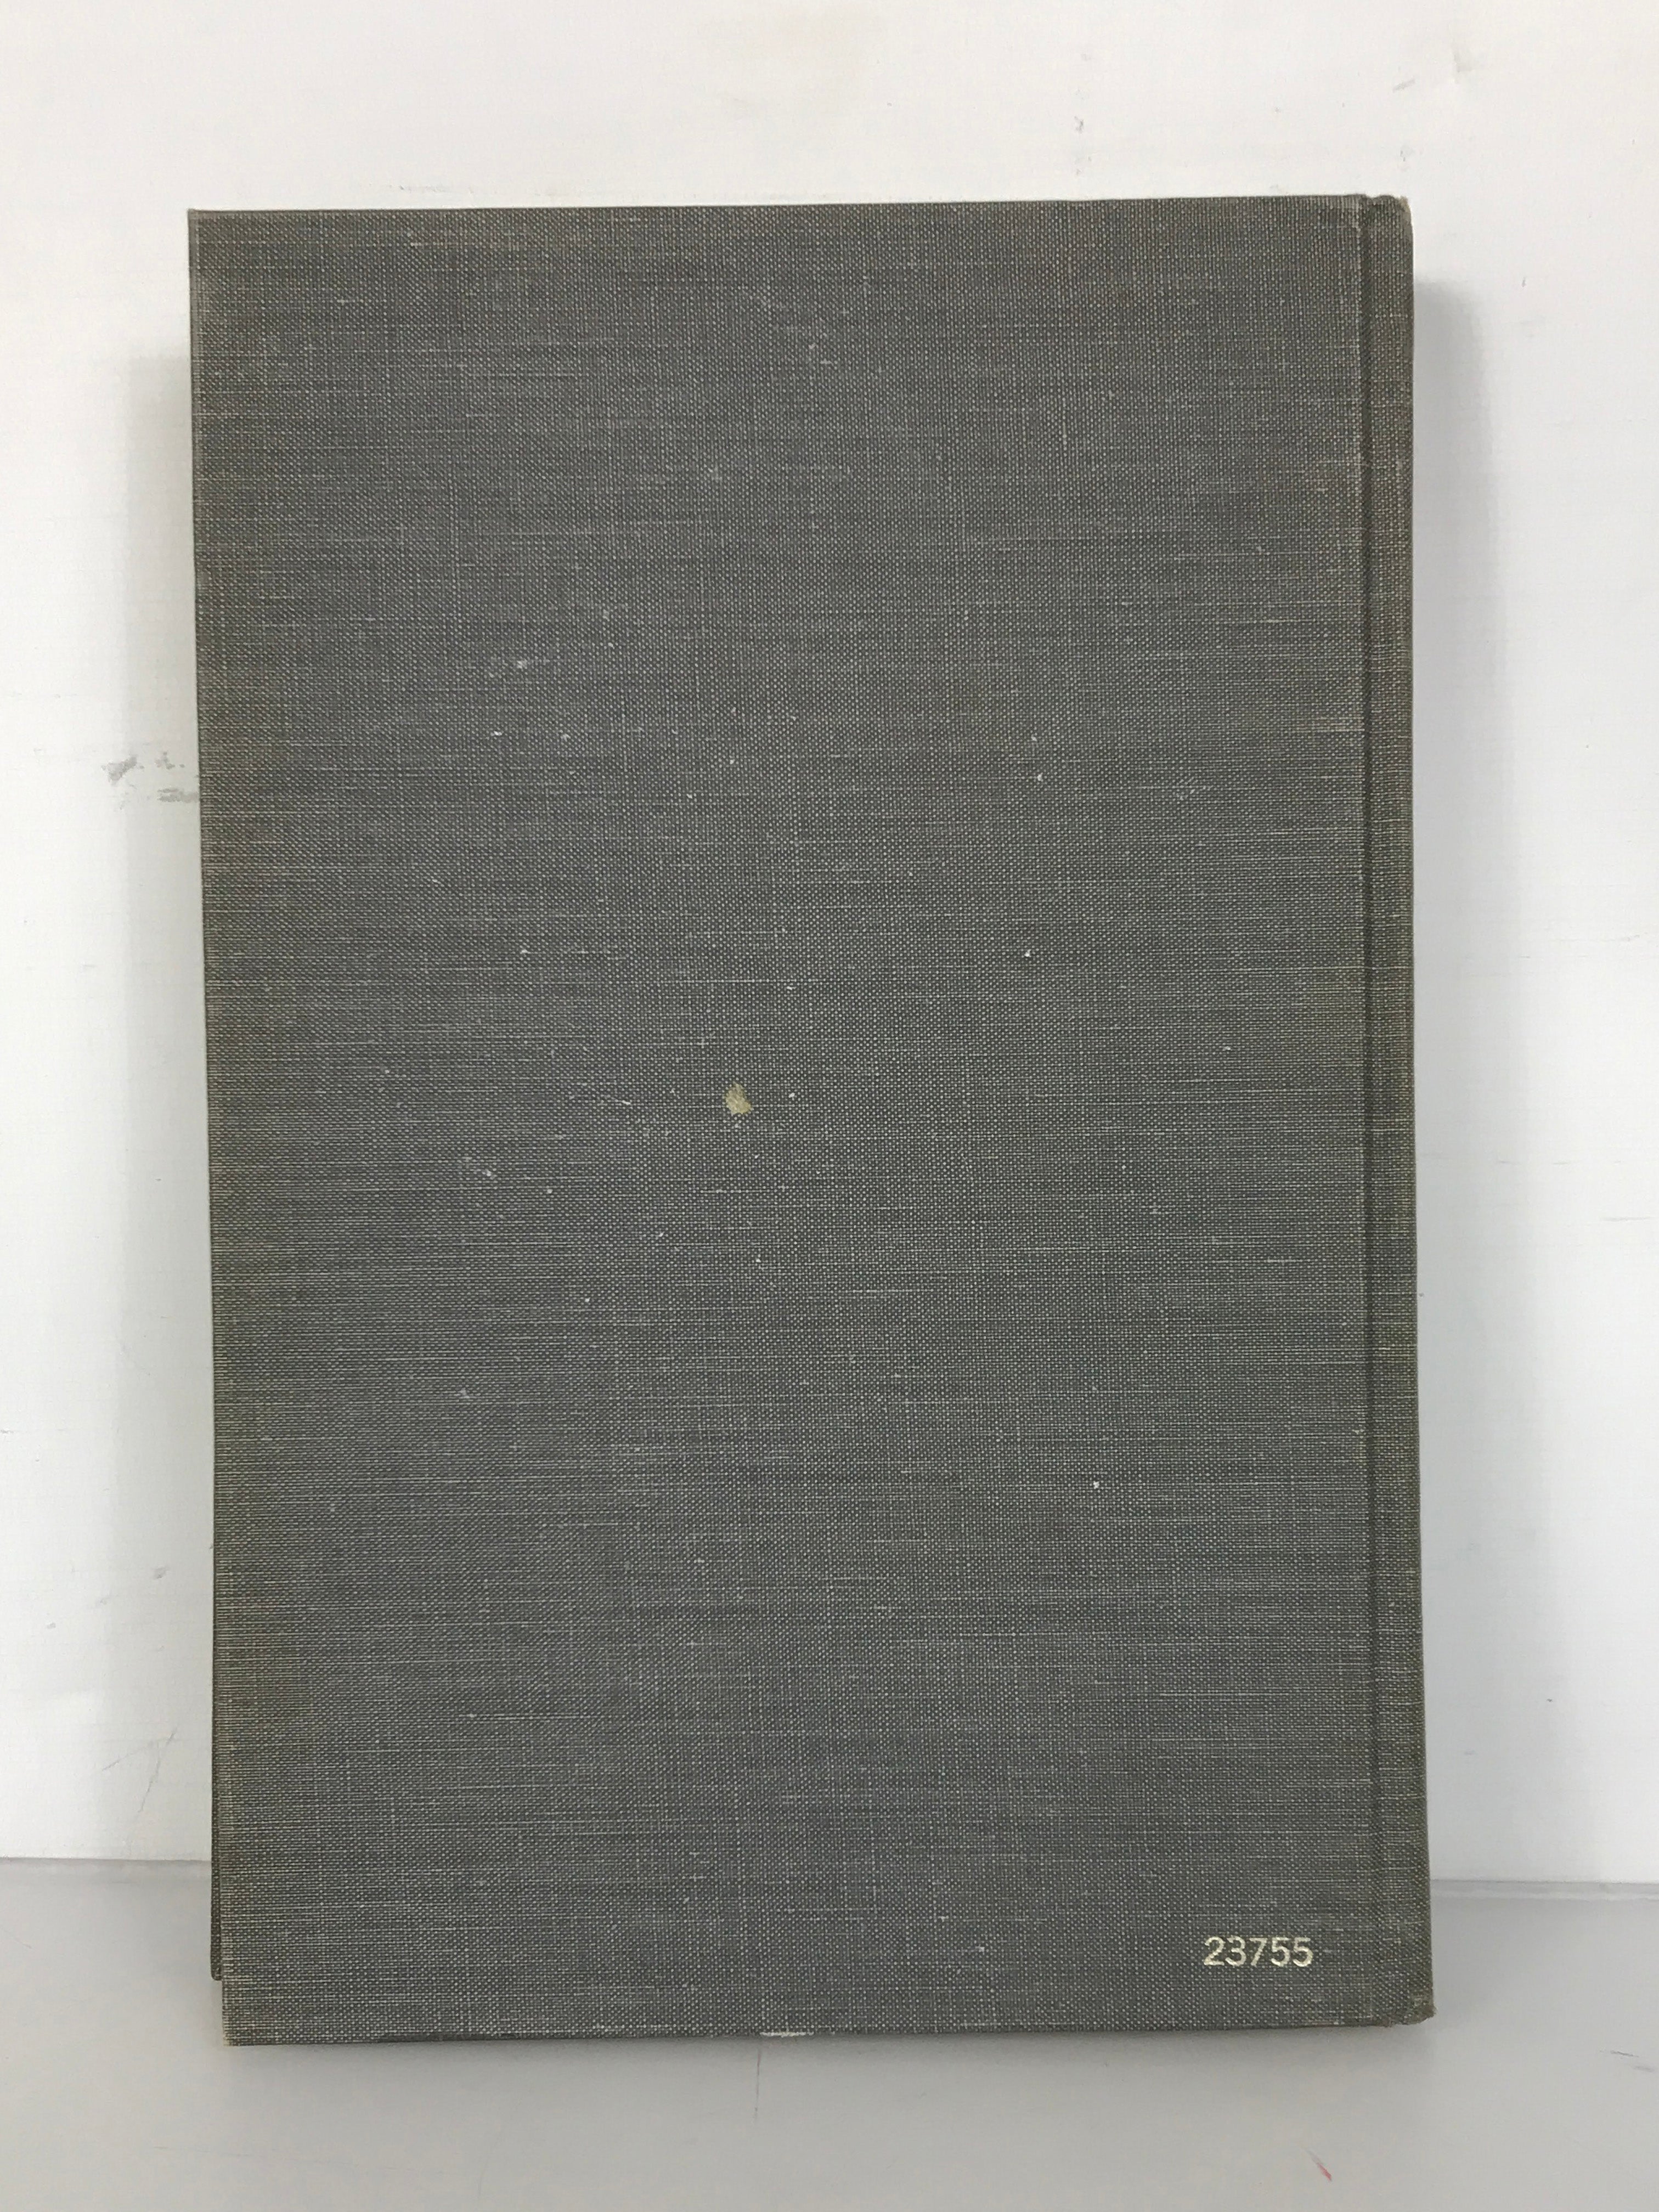 Methods in Social Research McGraw-Hill Series in Sociology William Goode and Paul Hatt 1952 HC